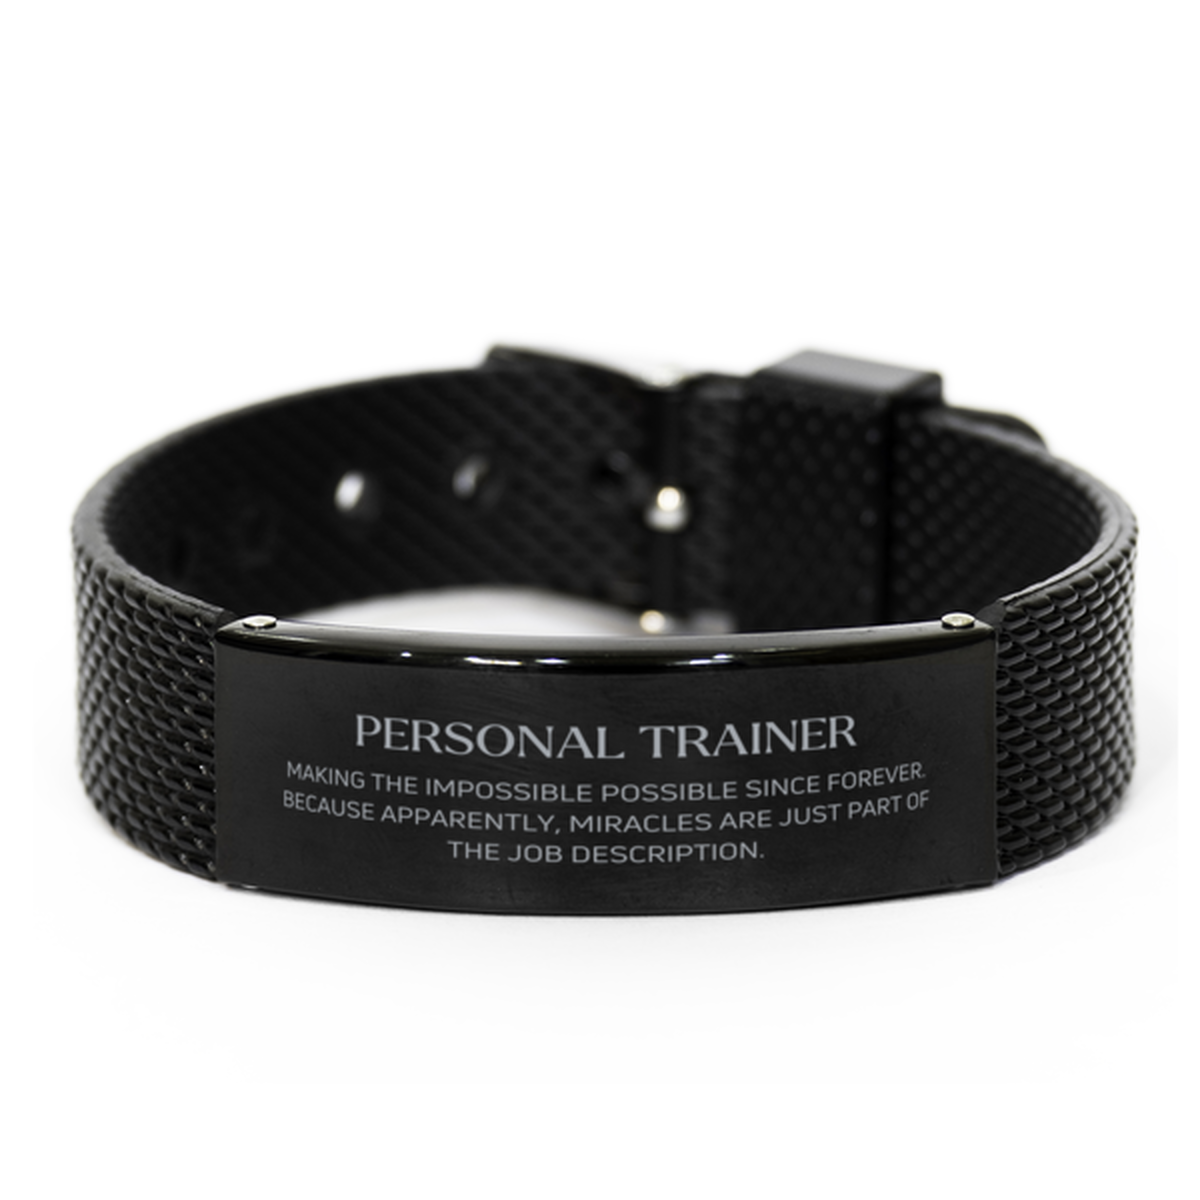 Funny Personal Trainer Gifts, Miracles are just part of the job description, Inspirational Birthday Black Shark Mesh Bracelet For Personal Trainer, Men, Women, Coworkers, Friends, Boss